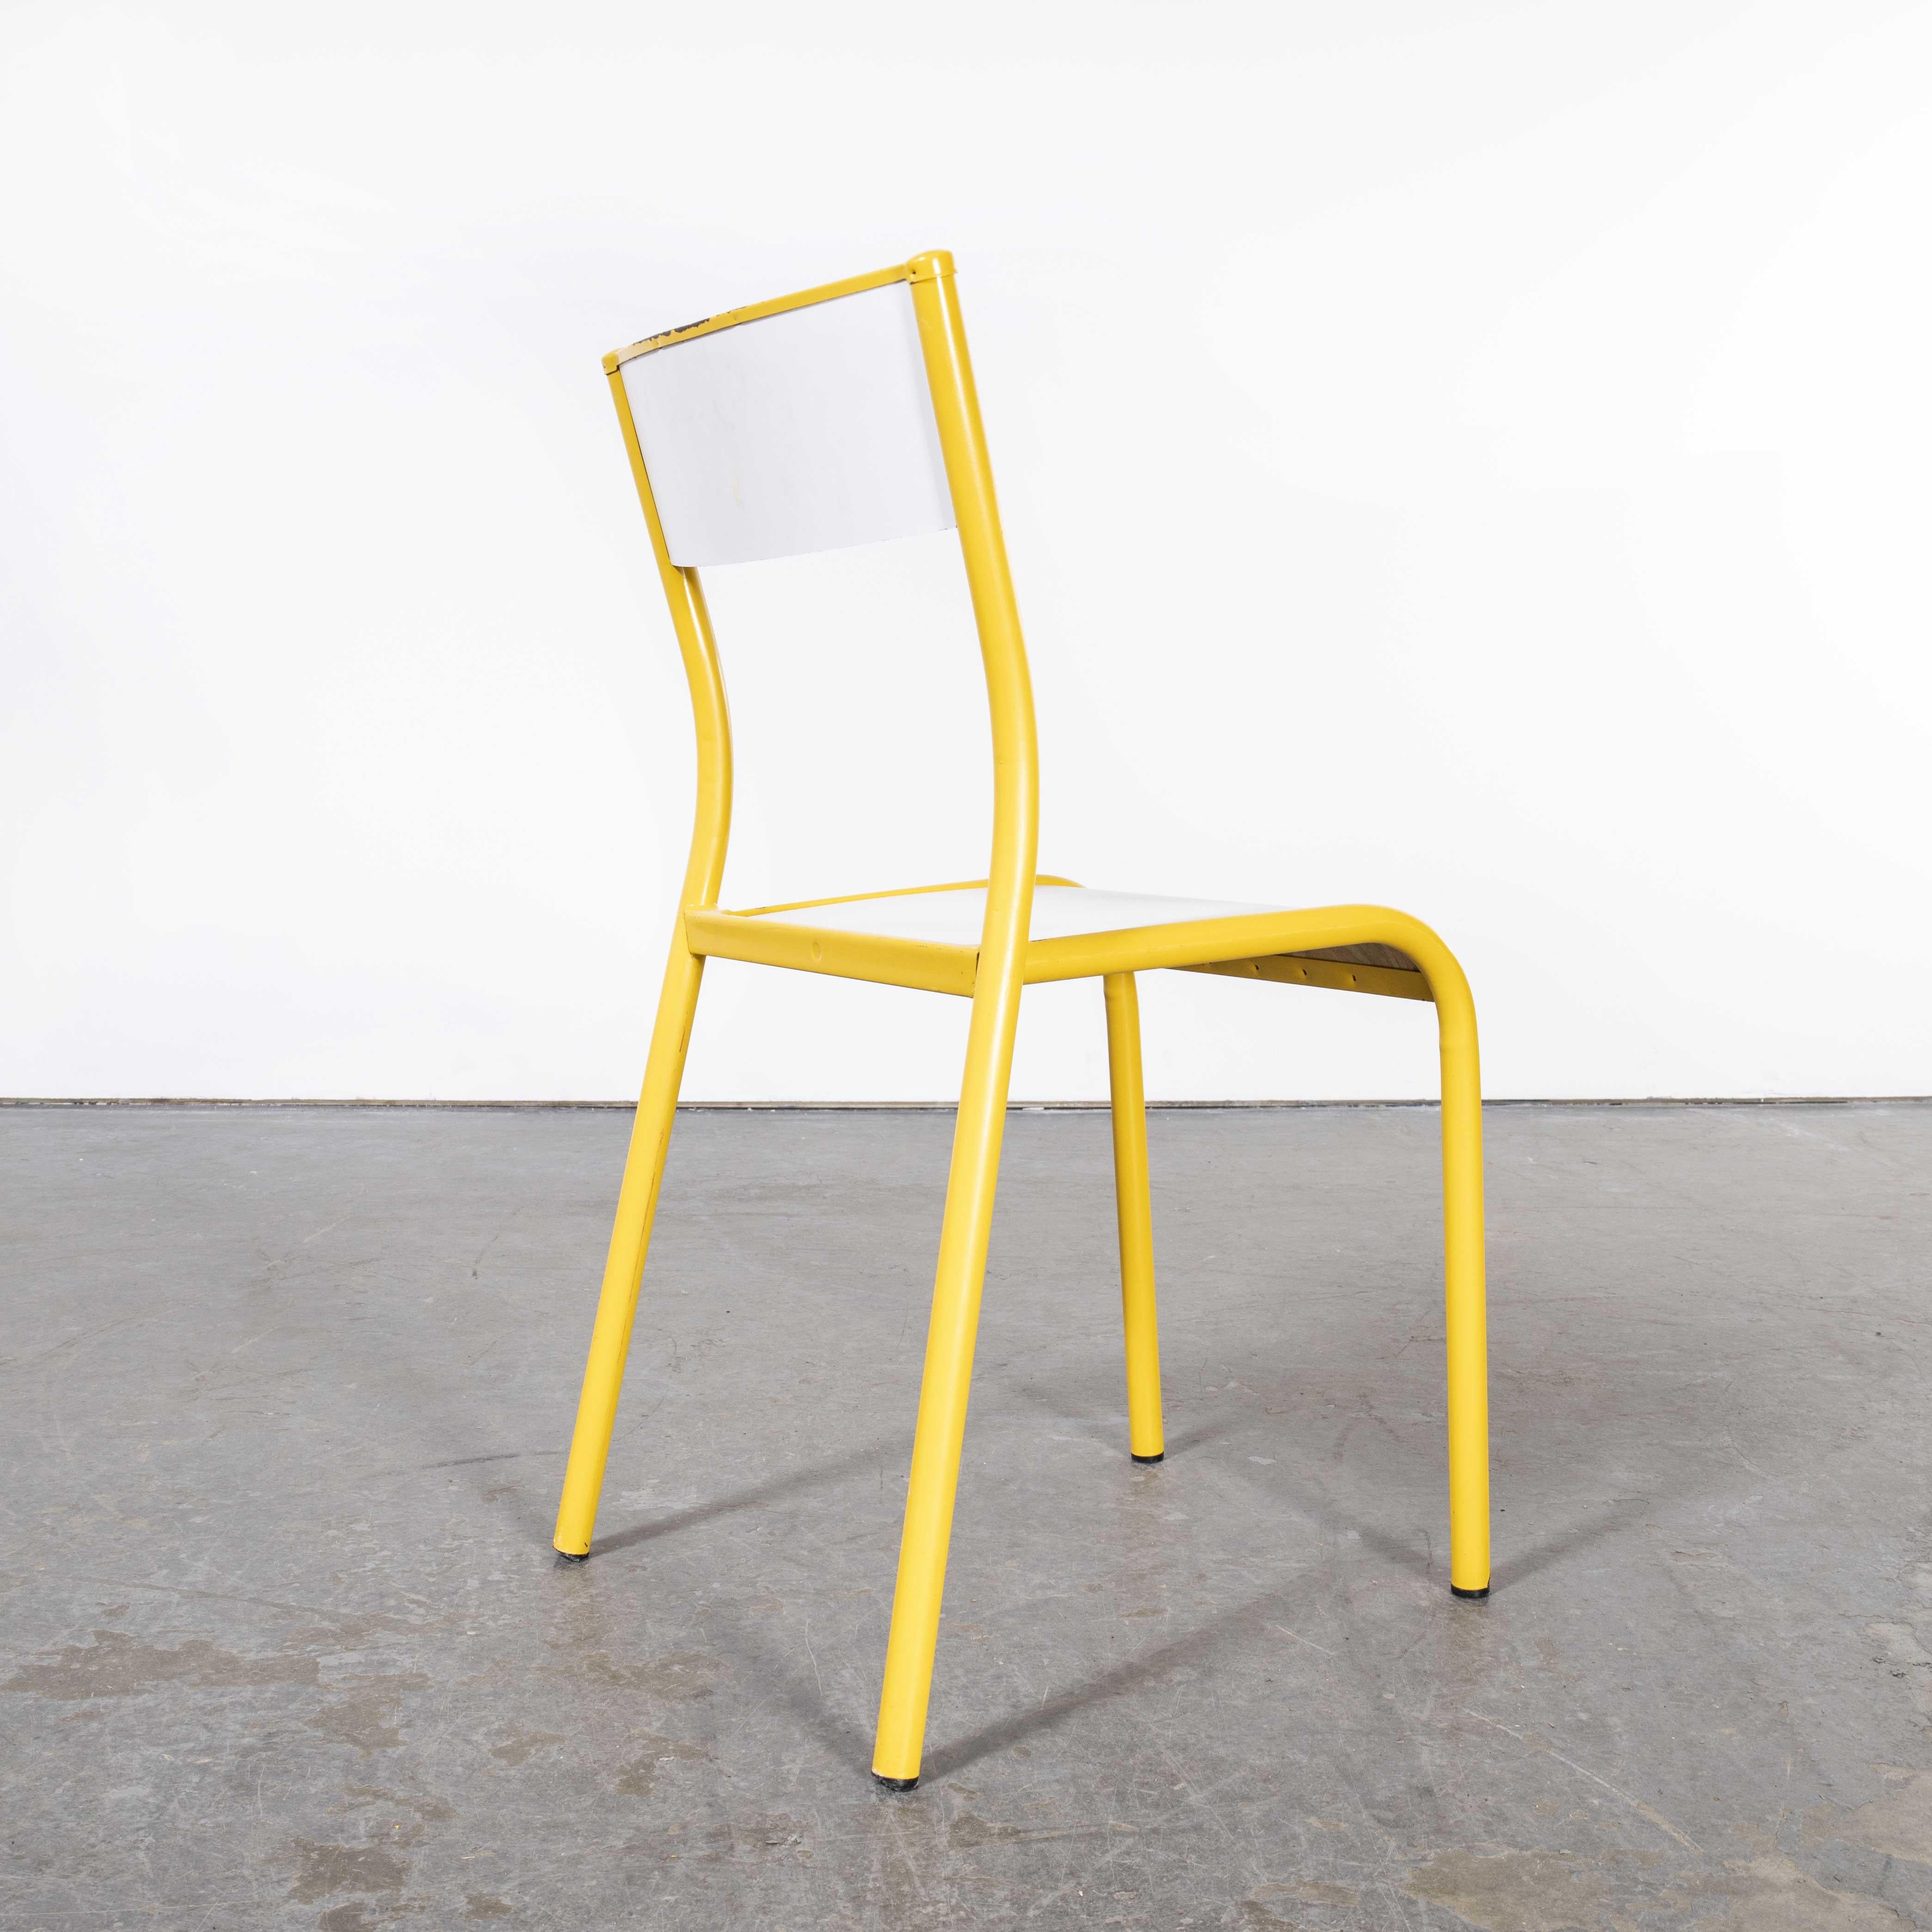 1970’s Yellow Mullca Stacking dining chair – set of eight
1970’s Yellow Mullca Stacking dining chair – set of eight. One of our most favourite chairs, in 1947 Robert Muller and Gaston Cavaillon created the company that went on to develop arguably